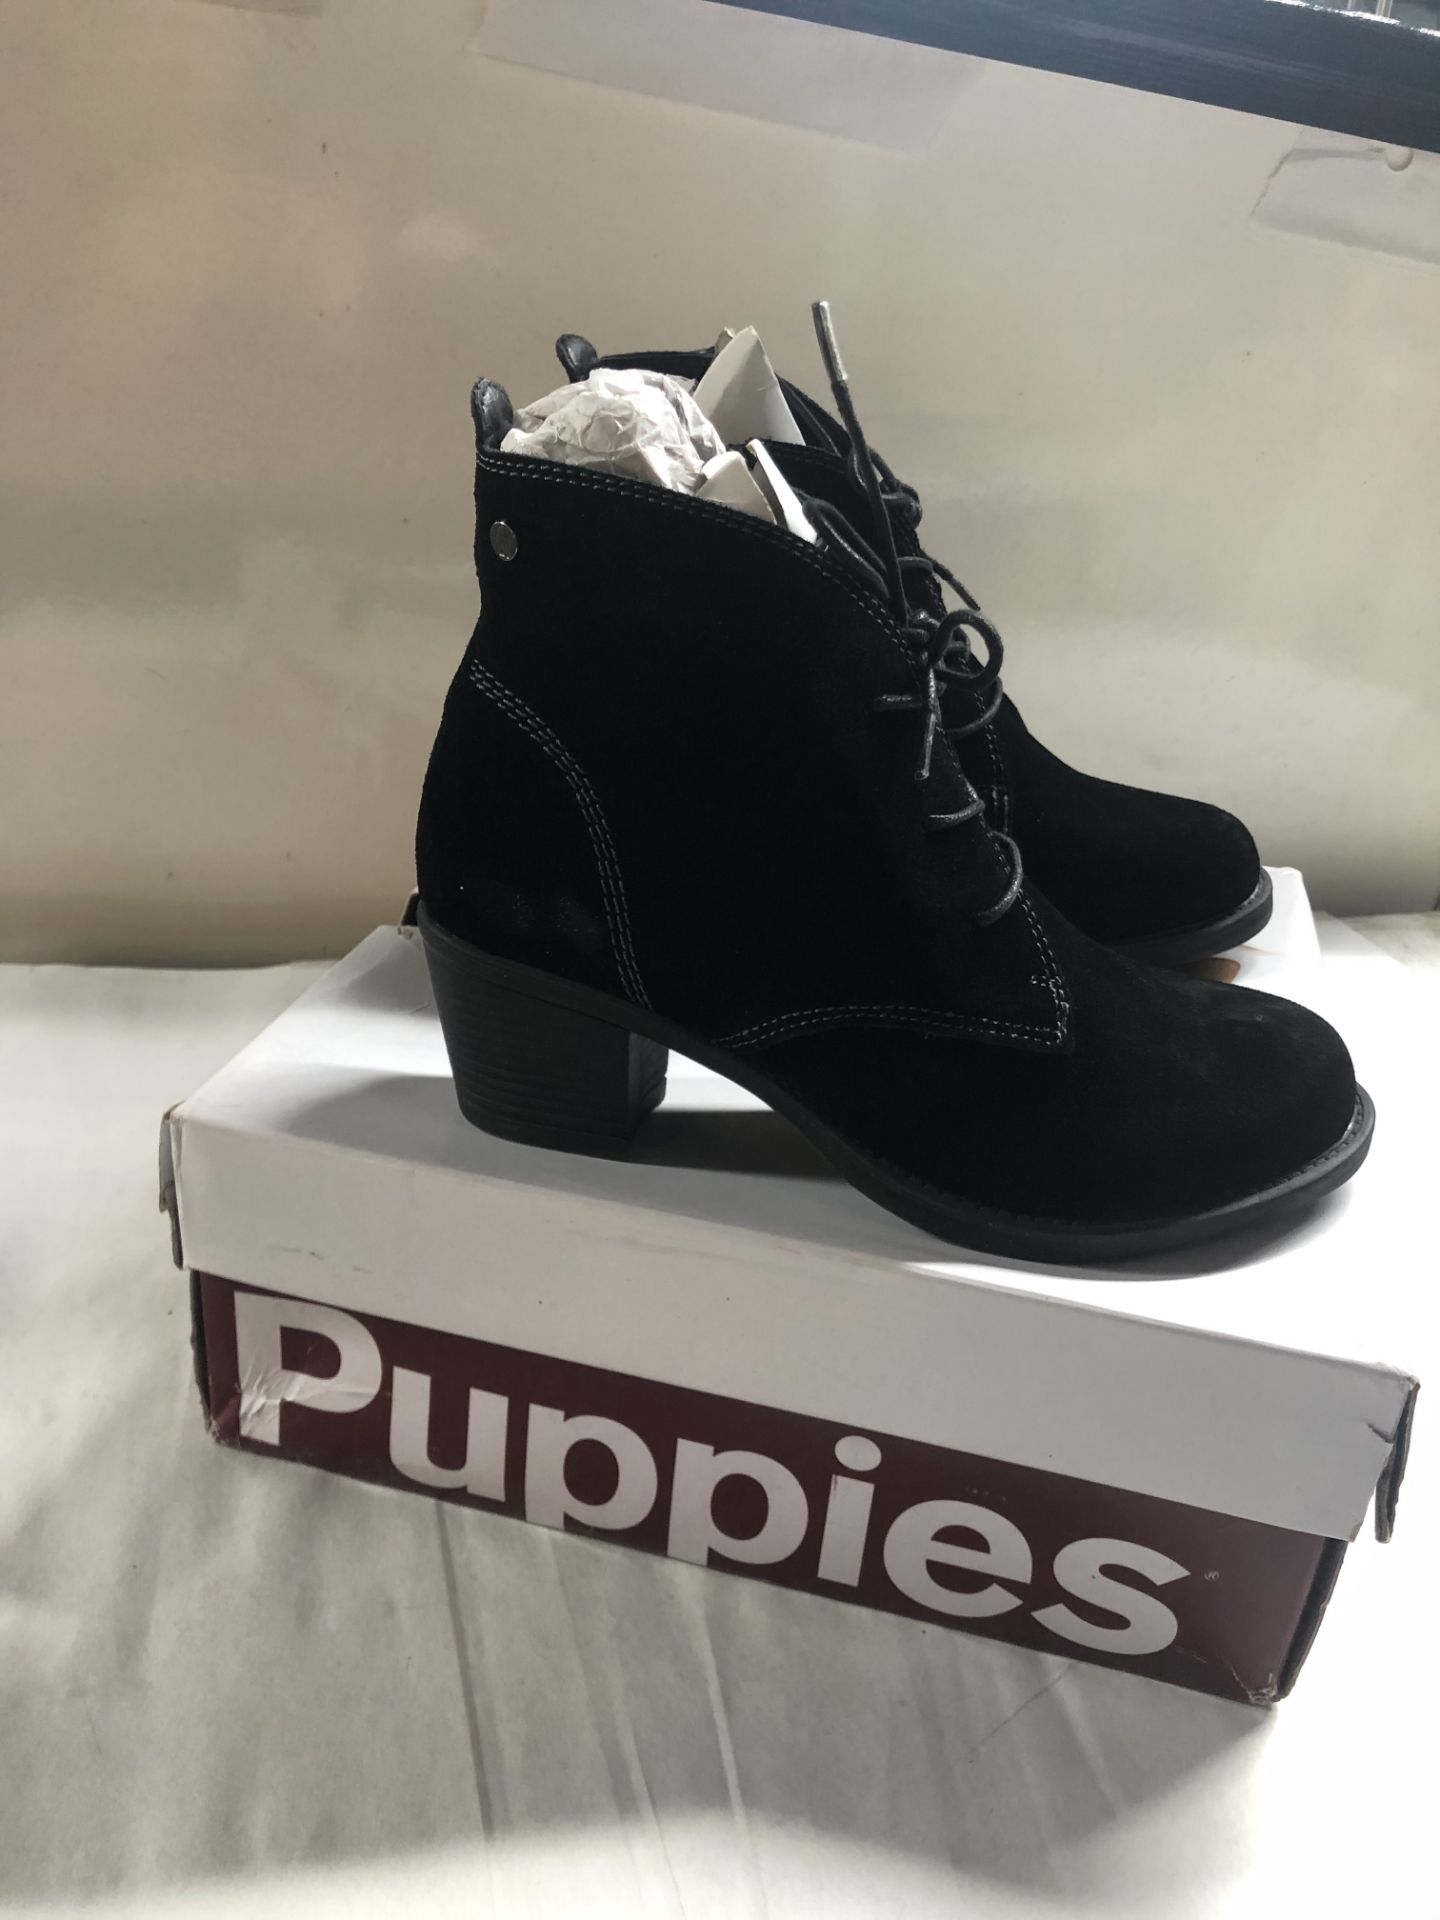 Hush Puppies Ankle Boots. UK 5